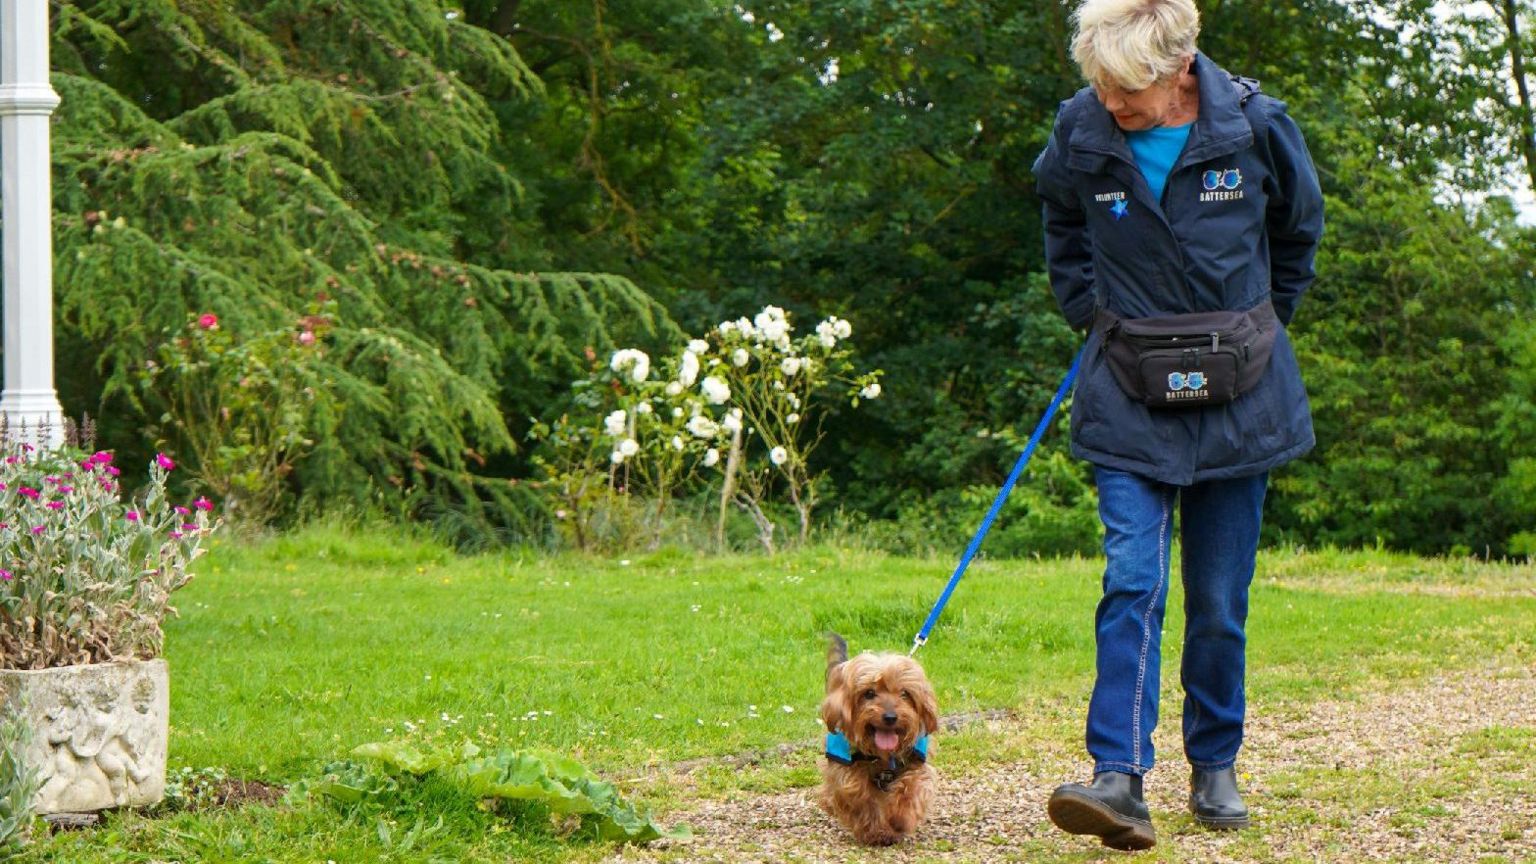 Ann Palmer, walking Jack, a brown Yorkshire Terrier, on a blue lead, wearing blue trousers, a blue Battersea coat and light blue shirt 